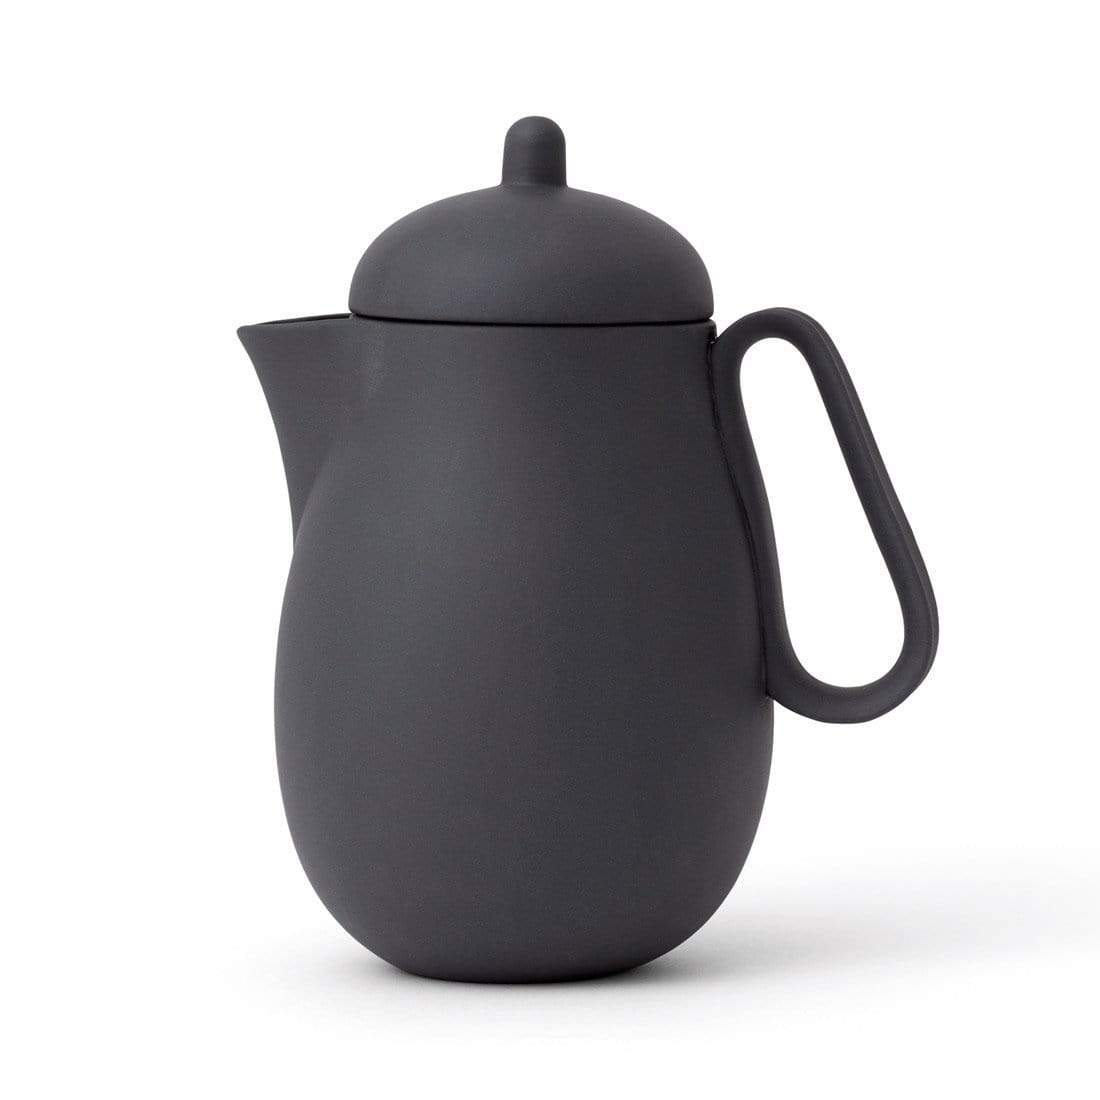 Nina teapot with infuser - 1L from VIVA